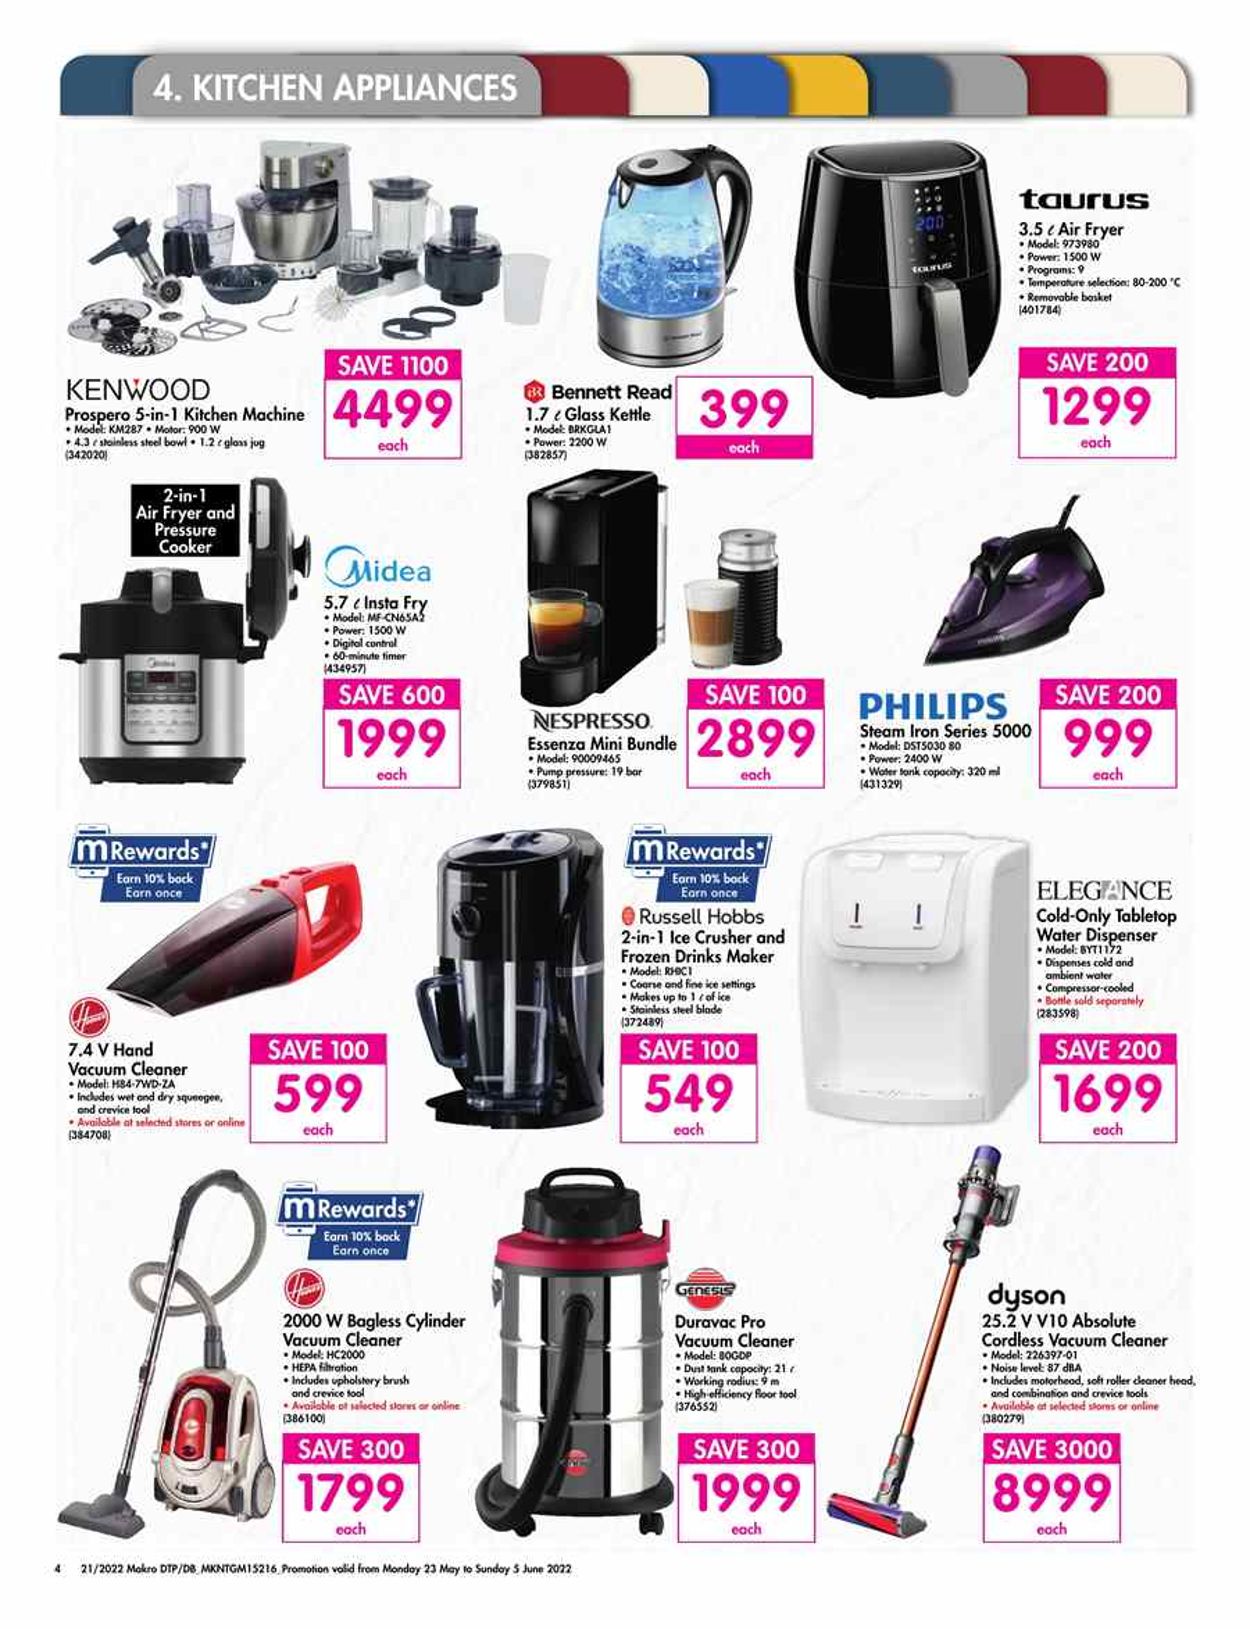 Makro Catalogue from 2022/05/23